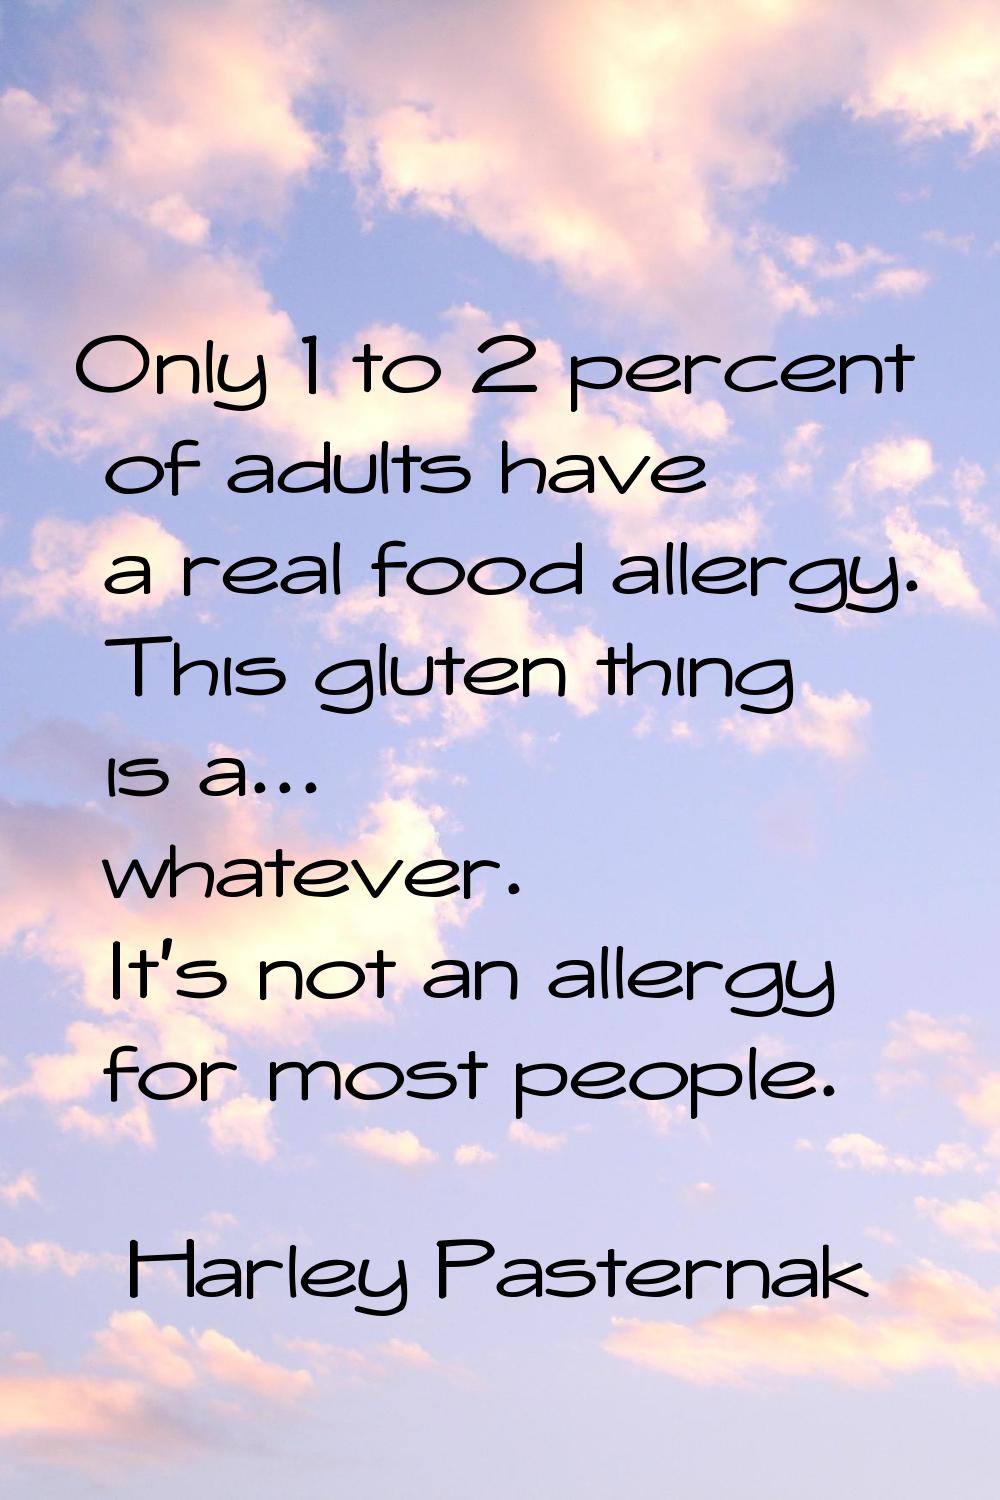 Only 1 to 2 percent of adults have a real food allergy. This gluten thing is a... whatever. It's no